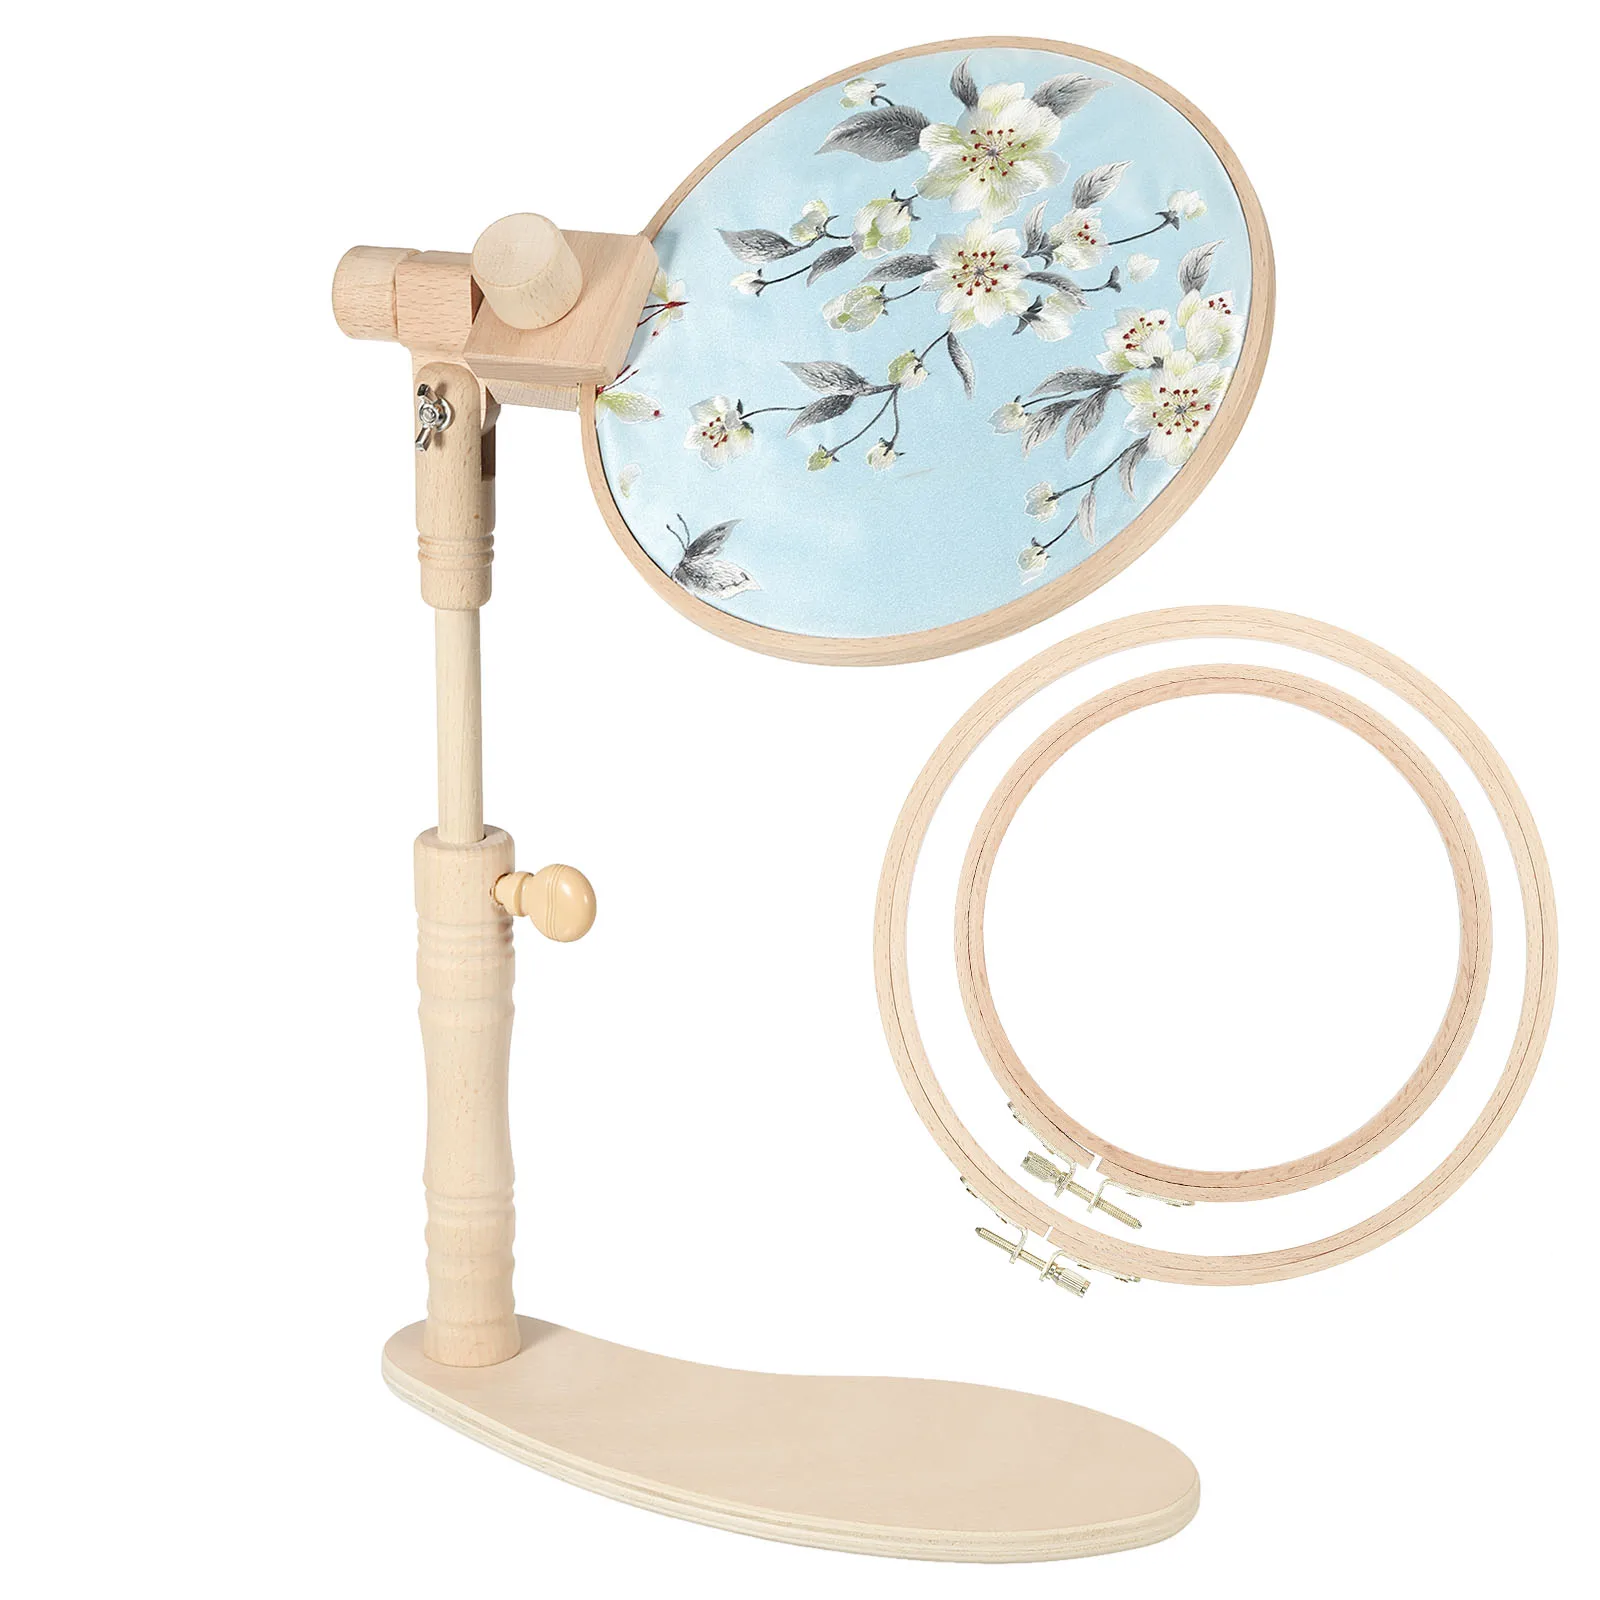 

Adjustable Embroidery Hoop Stand Rotated Cross Stitch Stand Embroidery Frame Beech Wood for DIY Craft Sewing Needlepoint